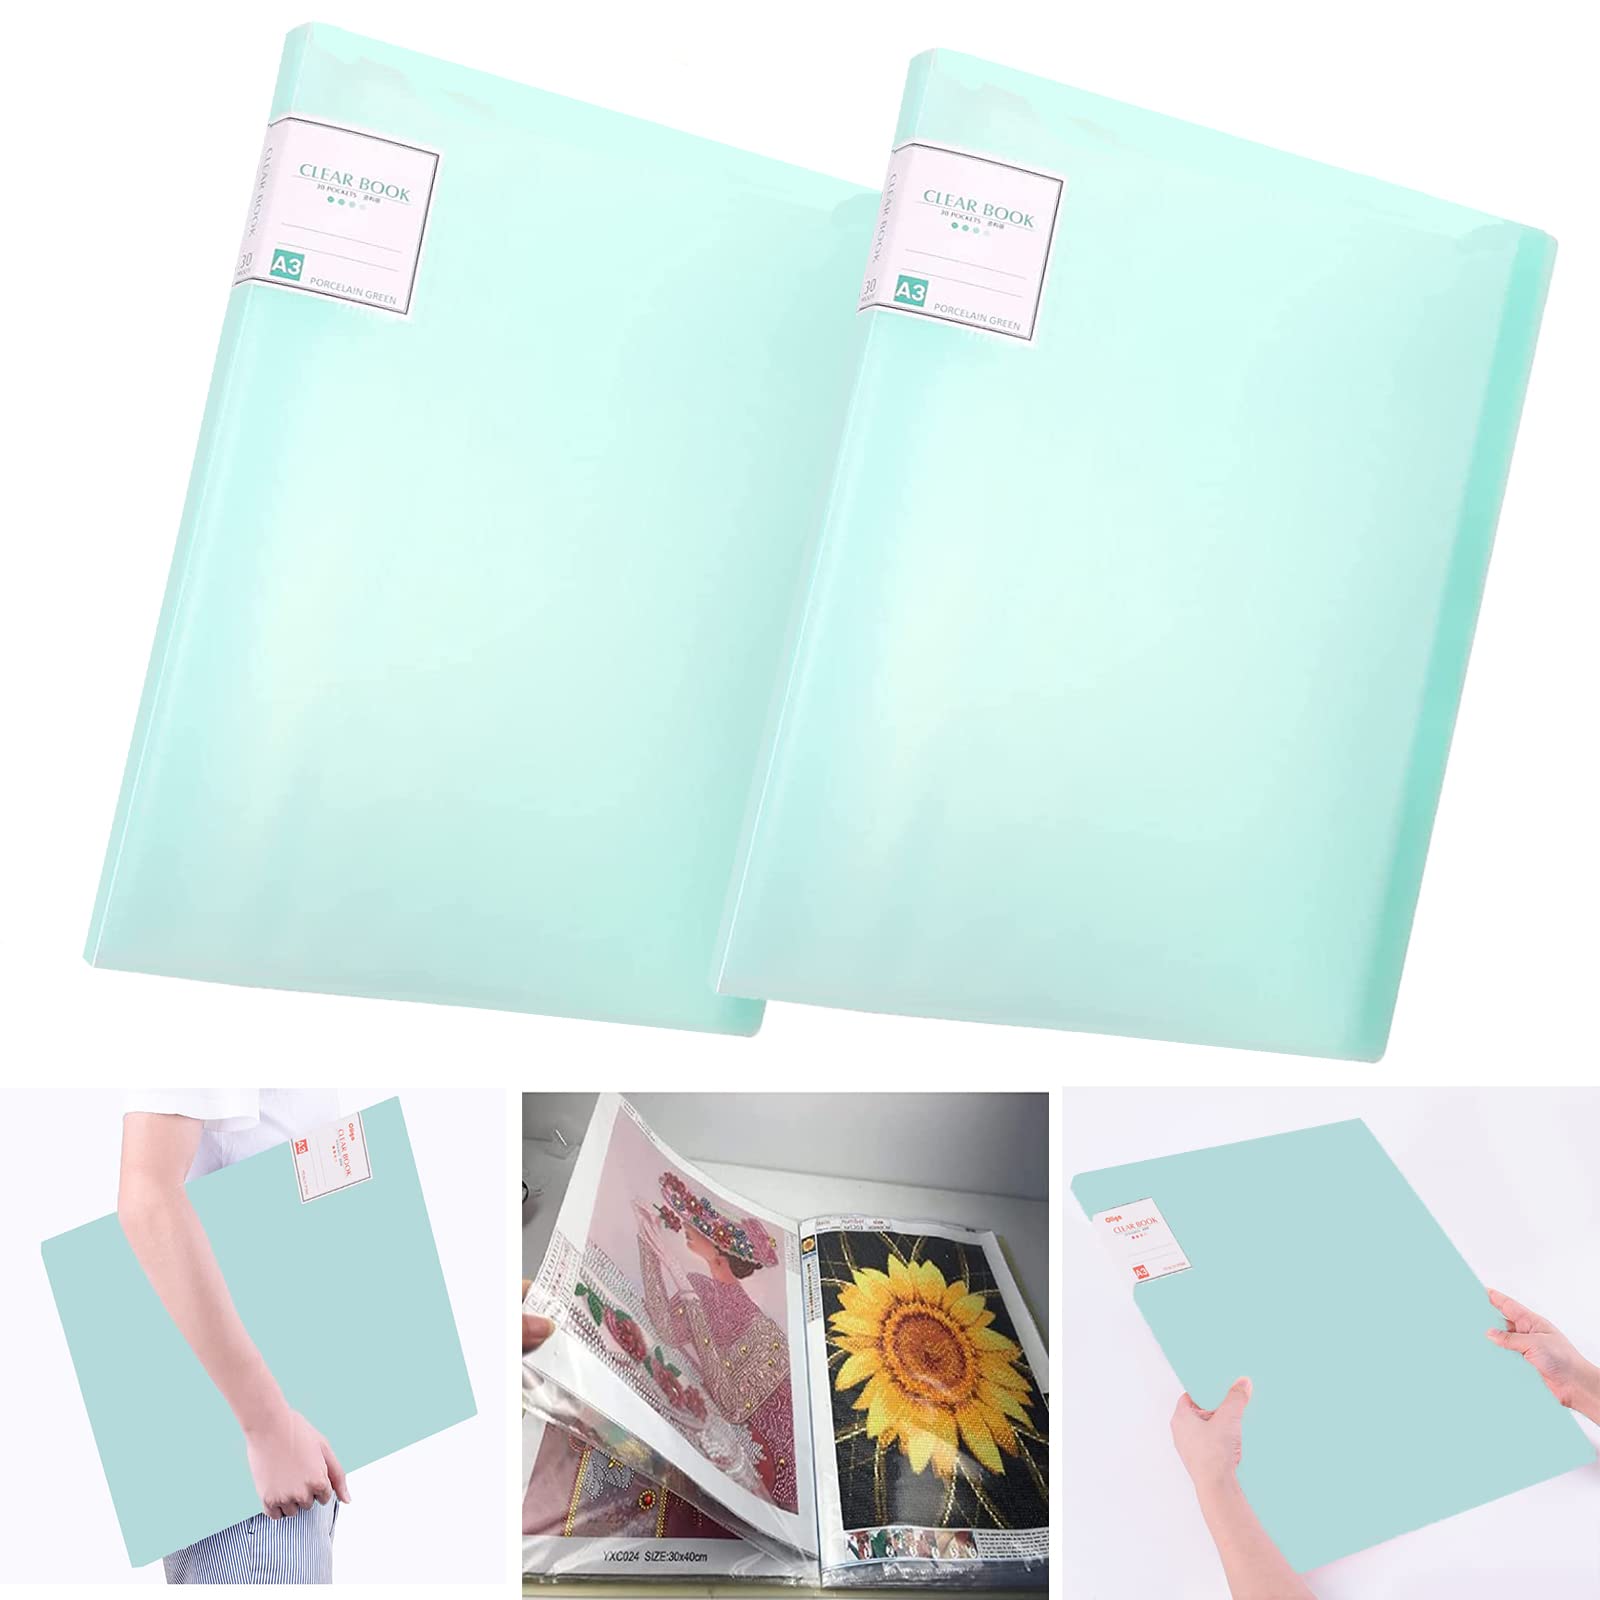 SDJMa A3 Sized Diamond Painting Storage Book, 17.3x12.8in Art Portfolio  Presentations Folder with 30 Pages Protectors for Painting, Drawing, Test  Paper, File 